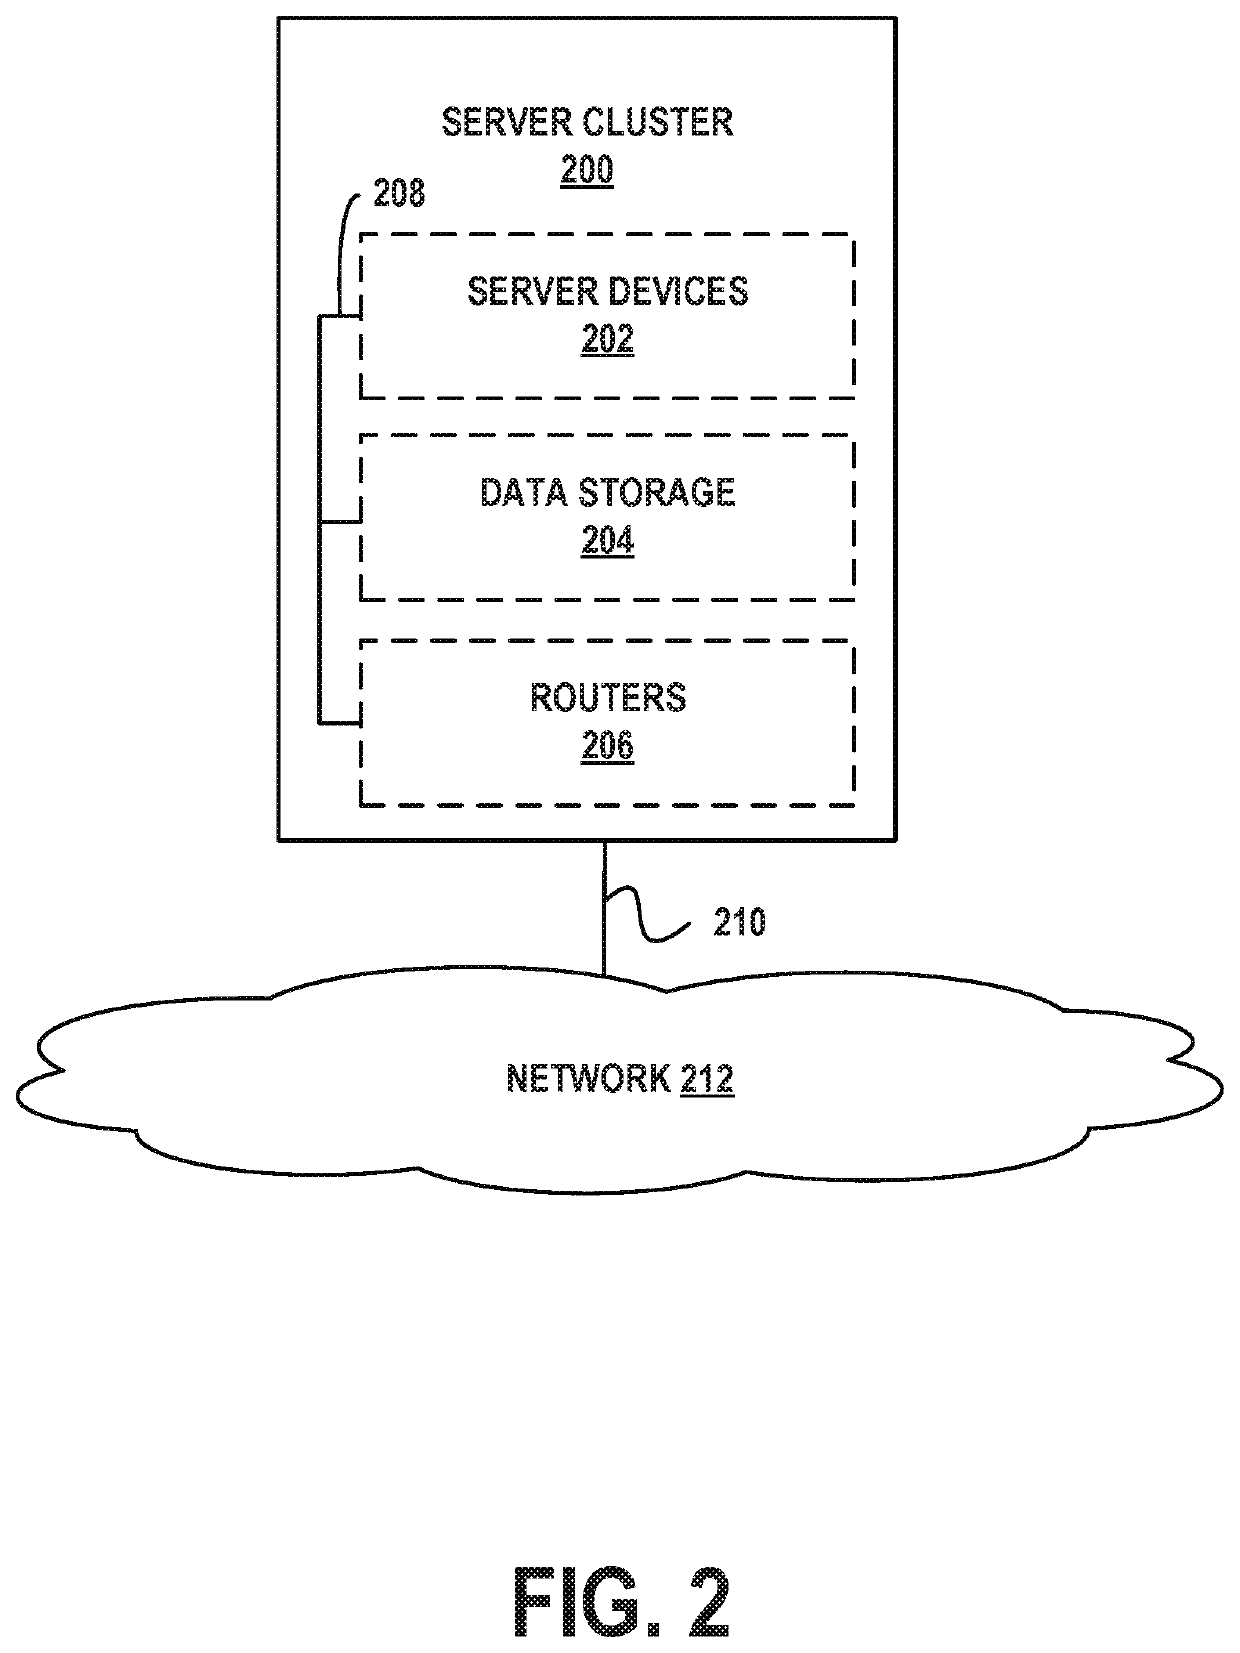 Automatic restructuring of graphical user interface components based on user interaction